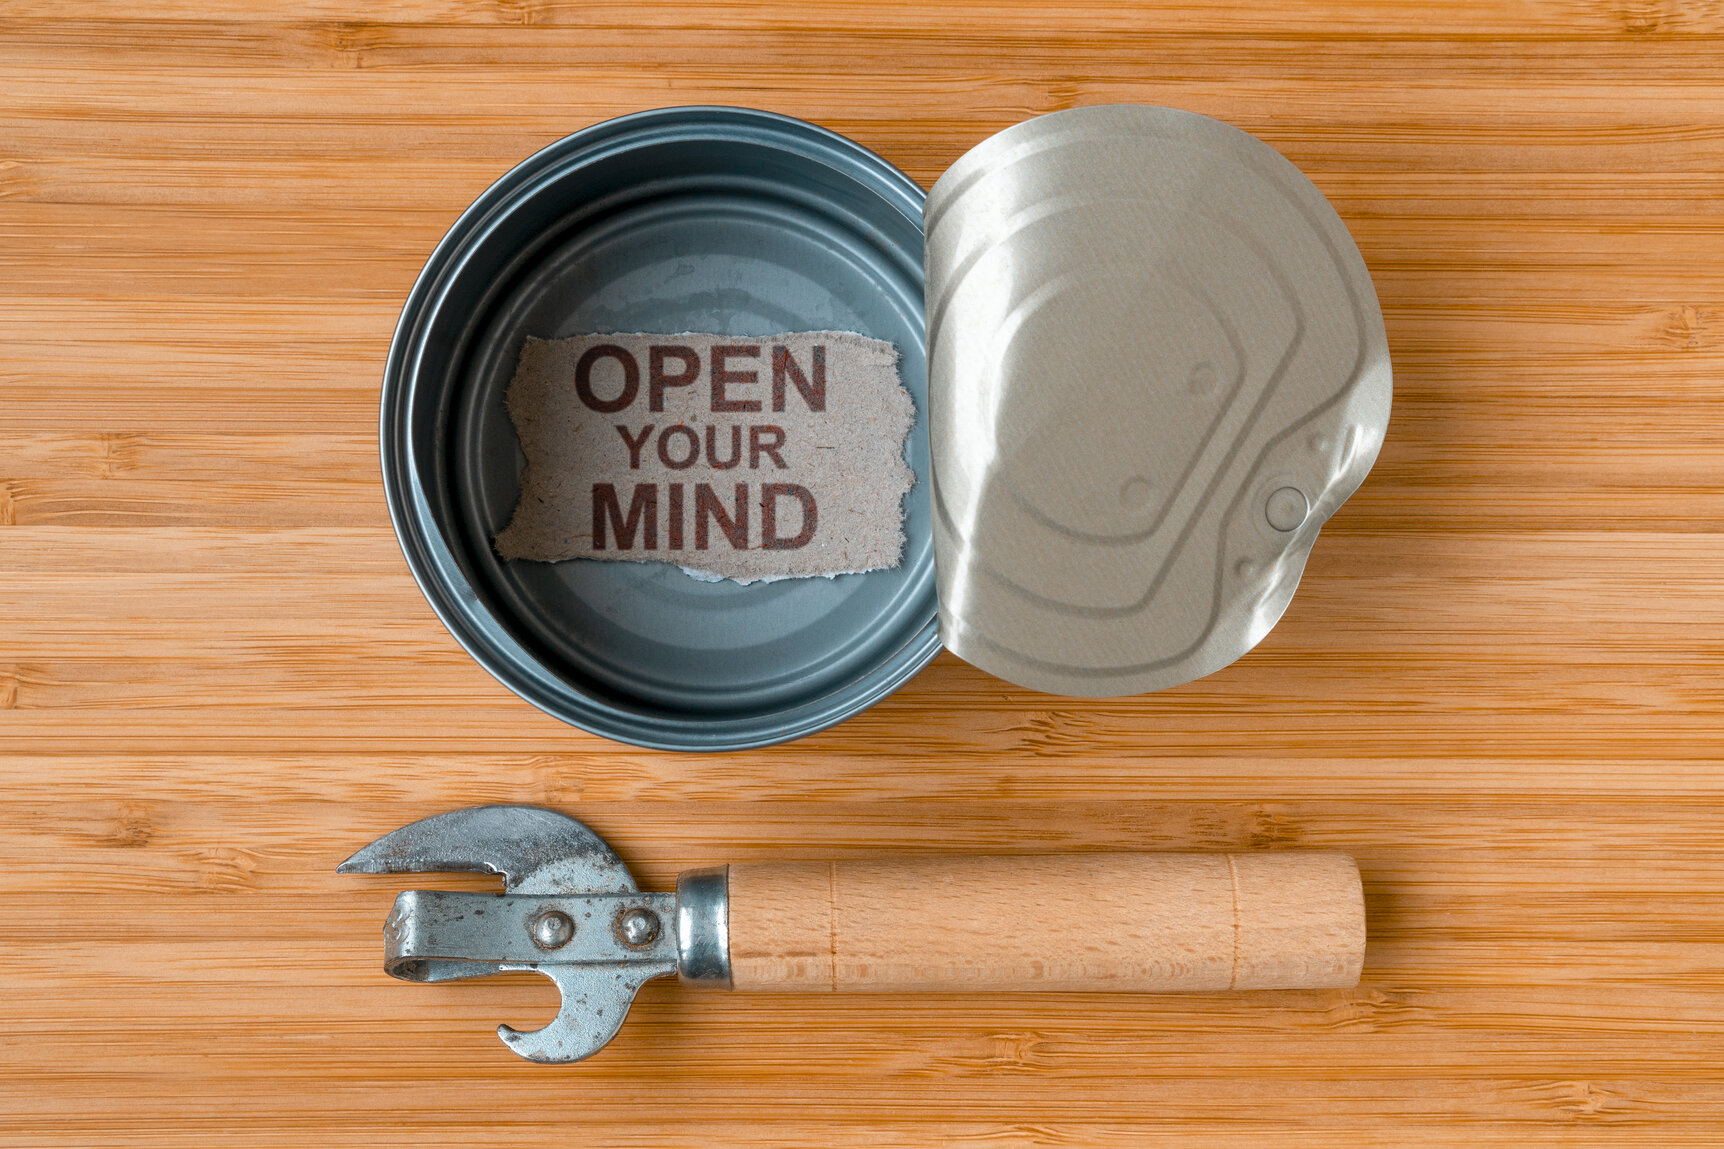 Open your mind to new and creative thinking